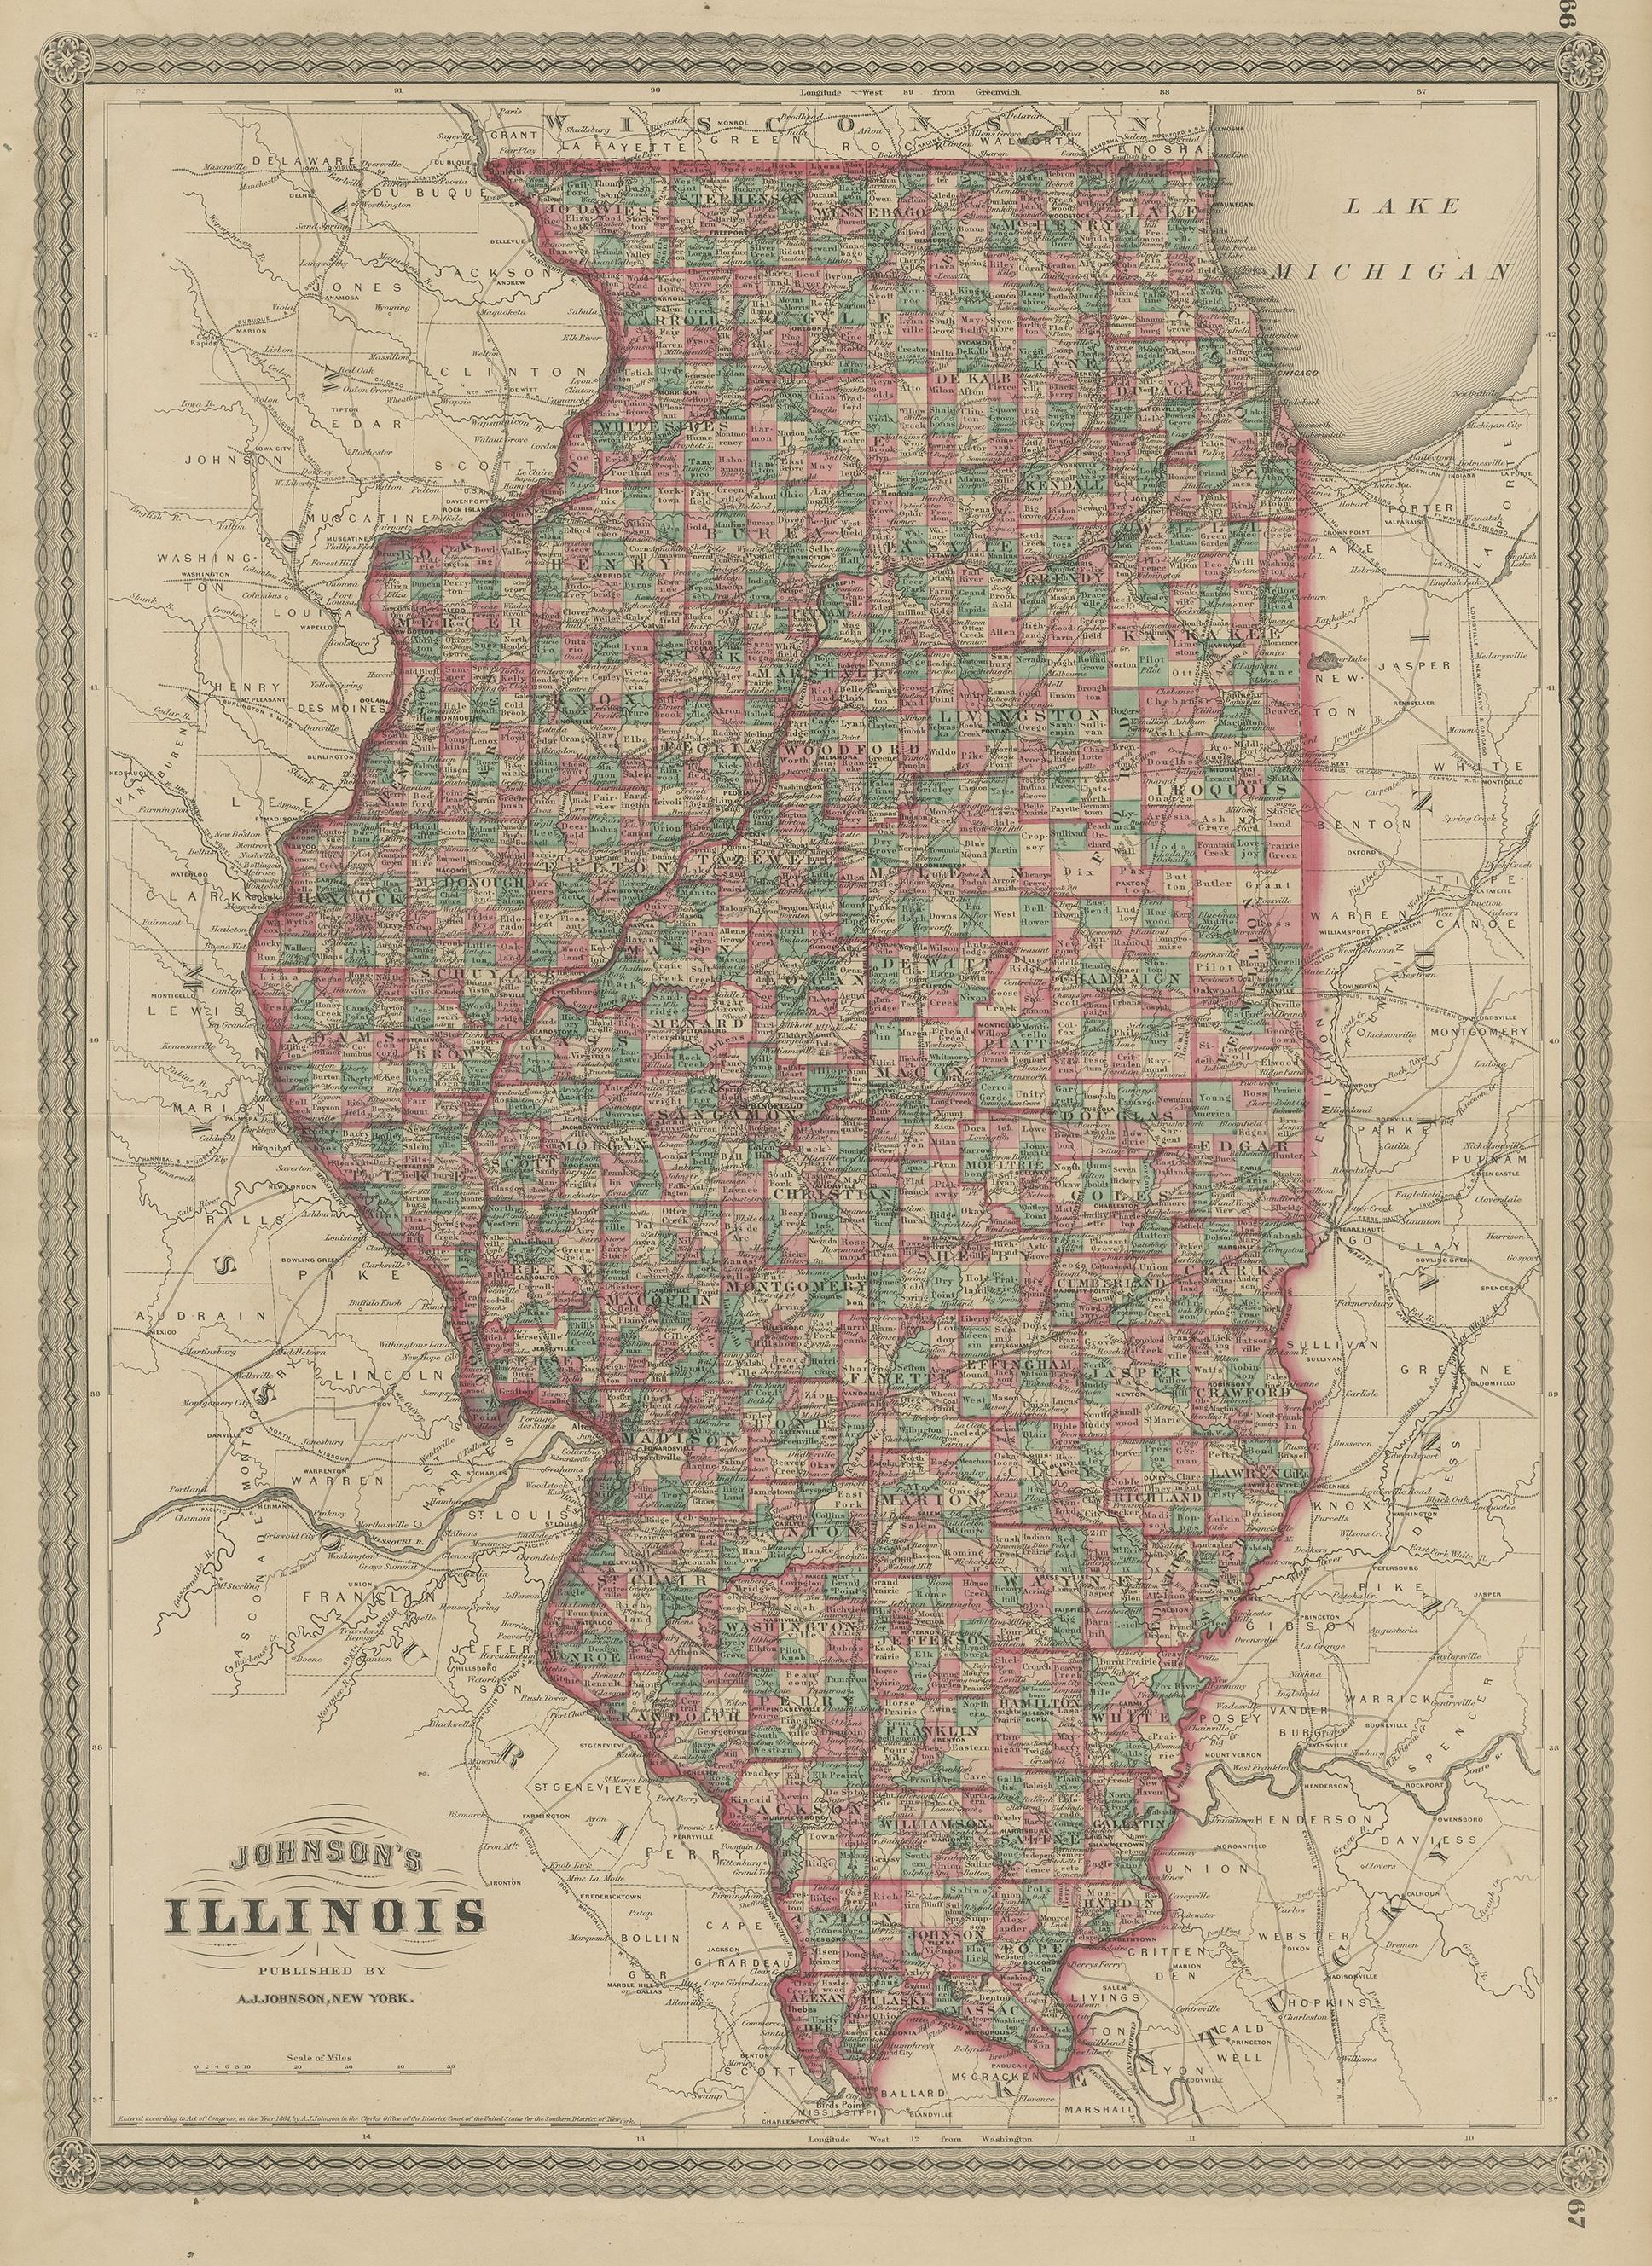 Antique map titled 'Johnson's Illinois'. Original map of Illinois. This map originates from 'Johnson's New Illustrated Family Atlas of the World' by A.J. Johnson. Published, 1872.